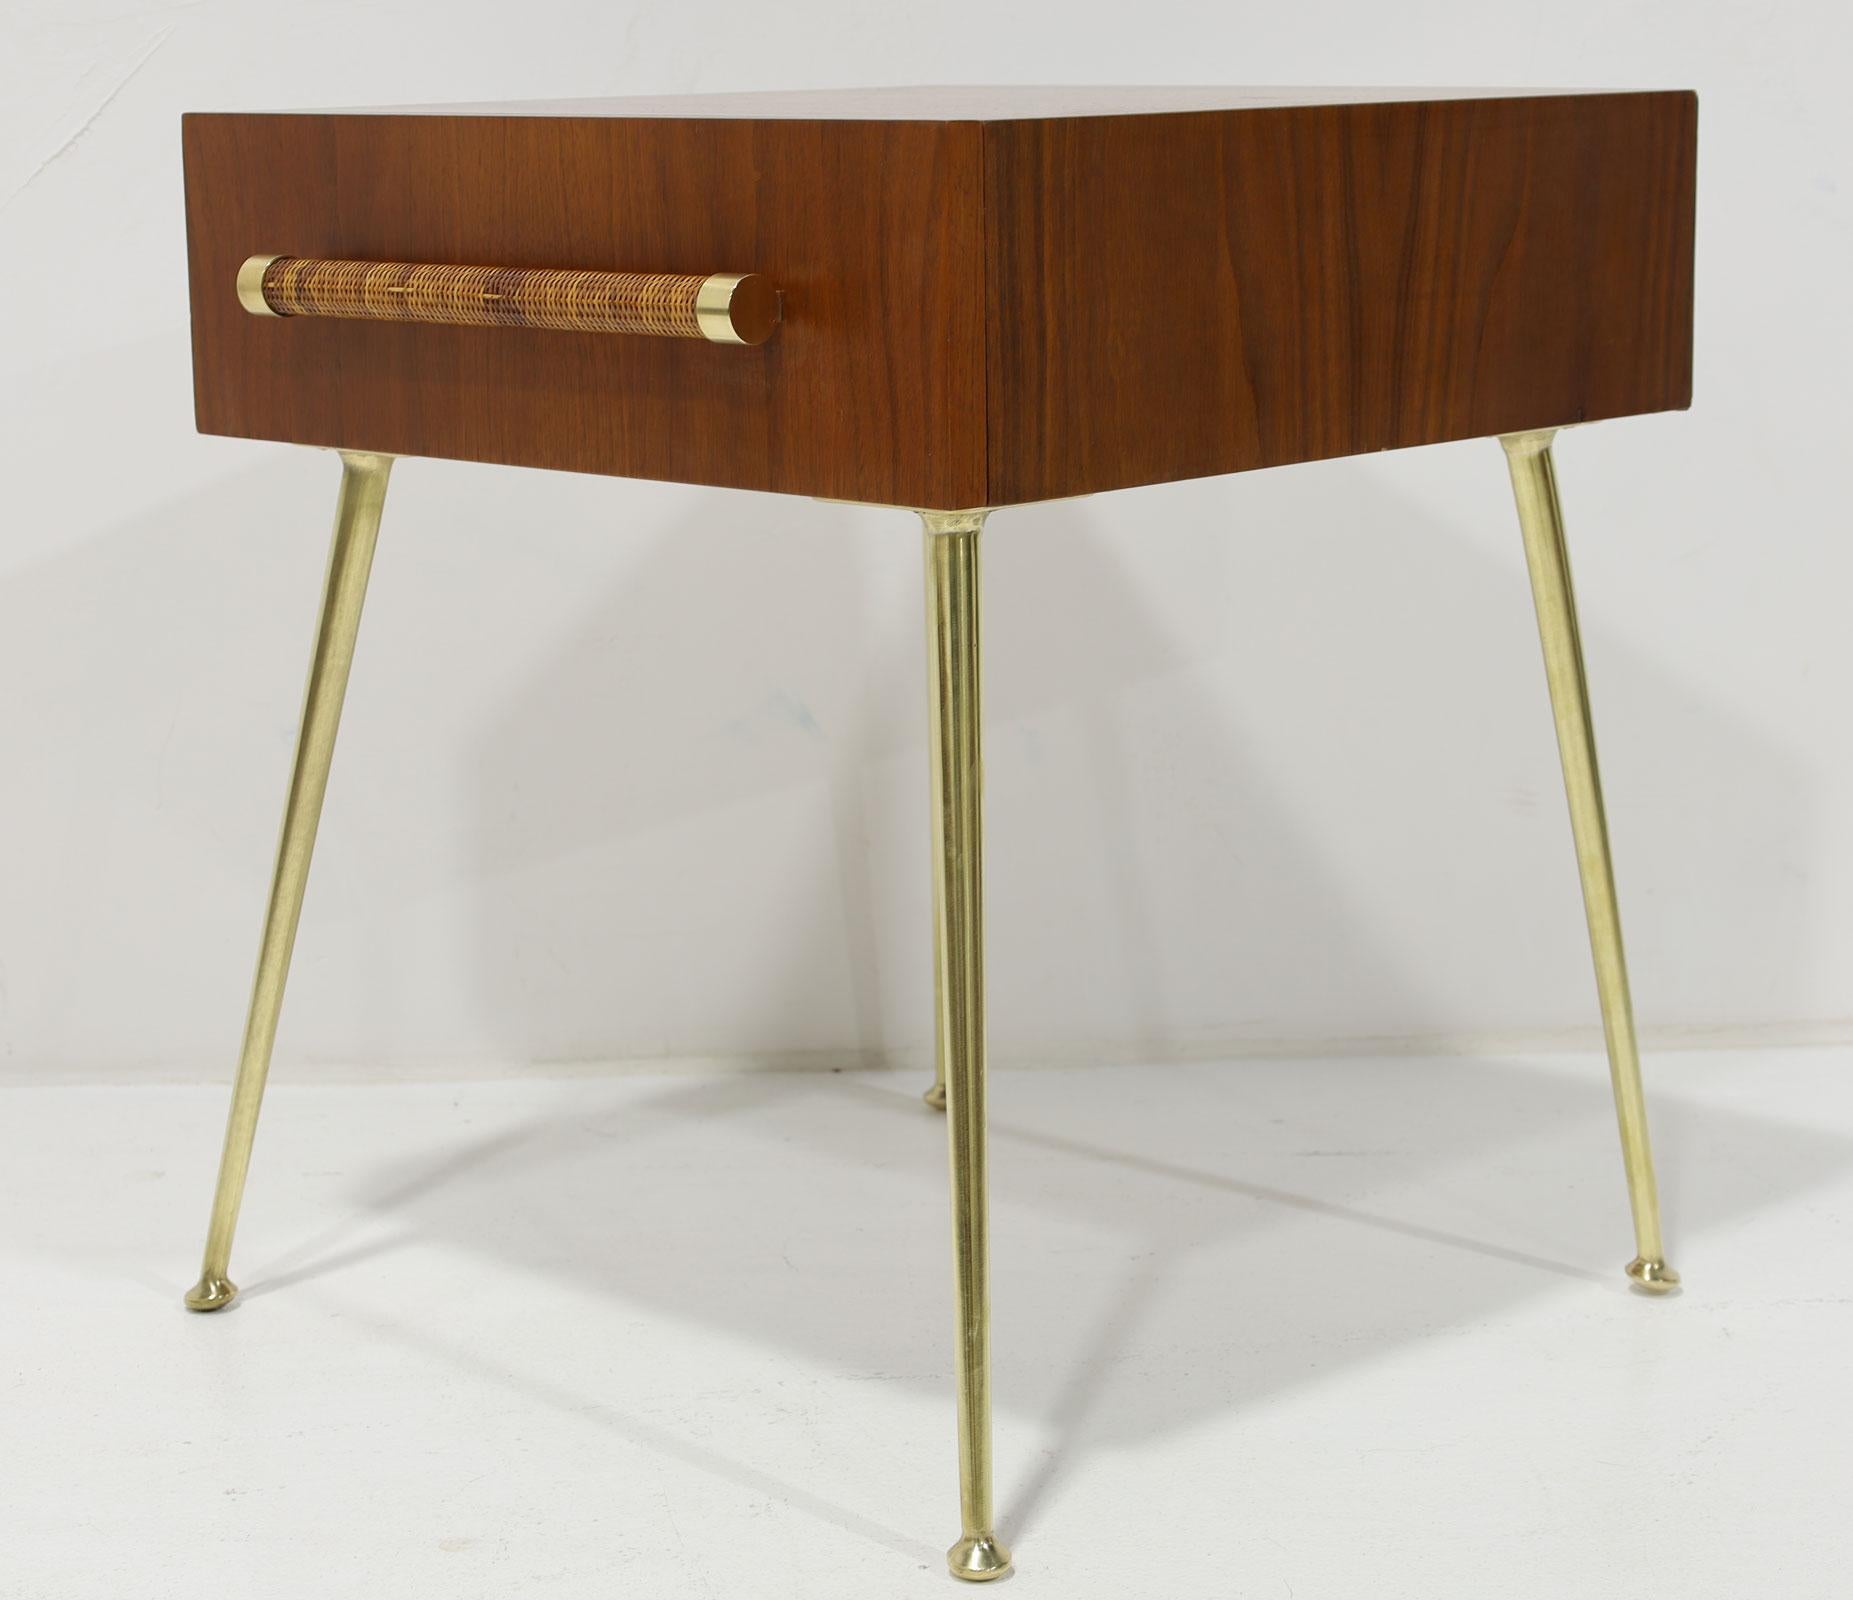 A Mid-Century Modern side cabinet by T.H. Robsjohn-Gibbings for Widdicomb. Walnut with cane wrapped handles and brass legs. Circa 1950. Sometimes used as a side table or a nightstand. 